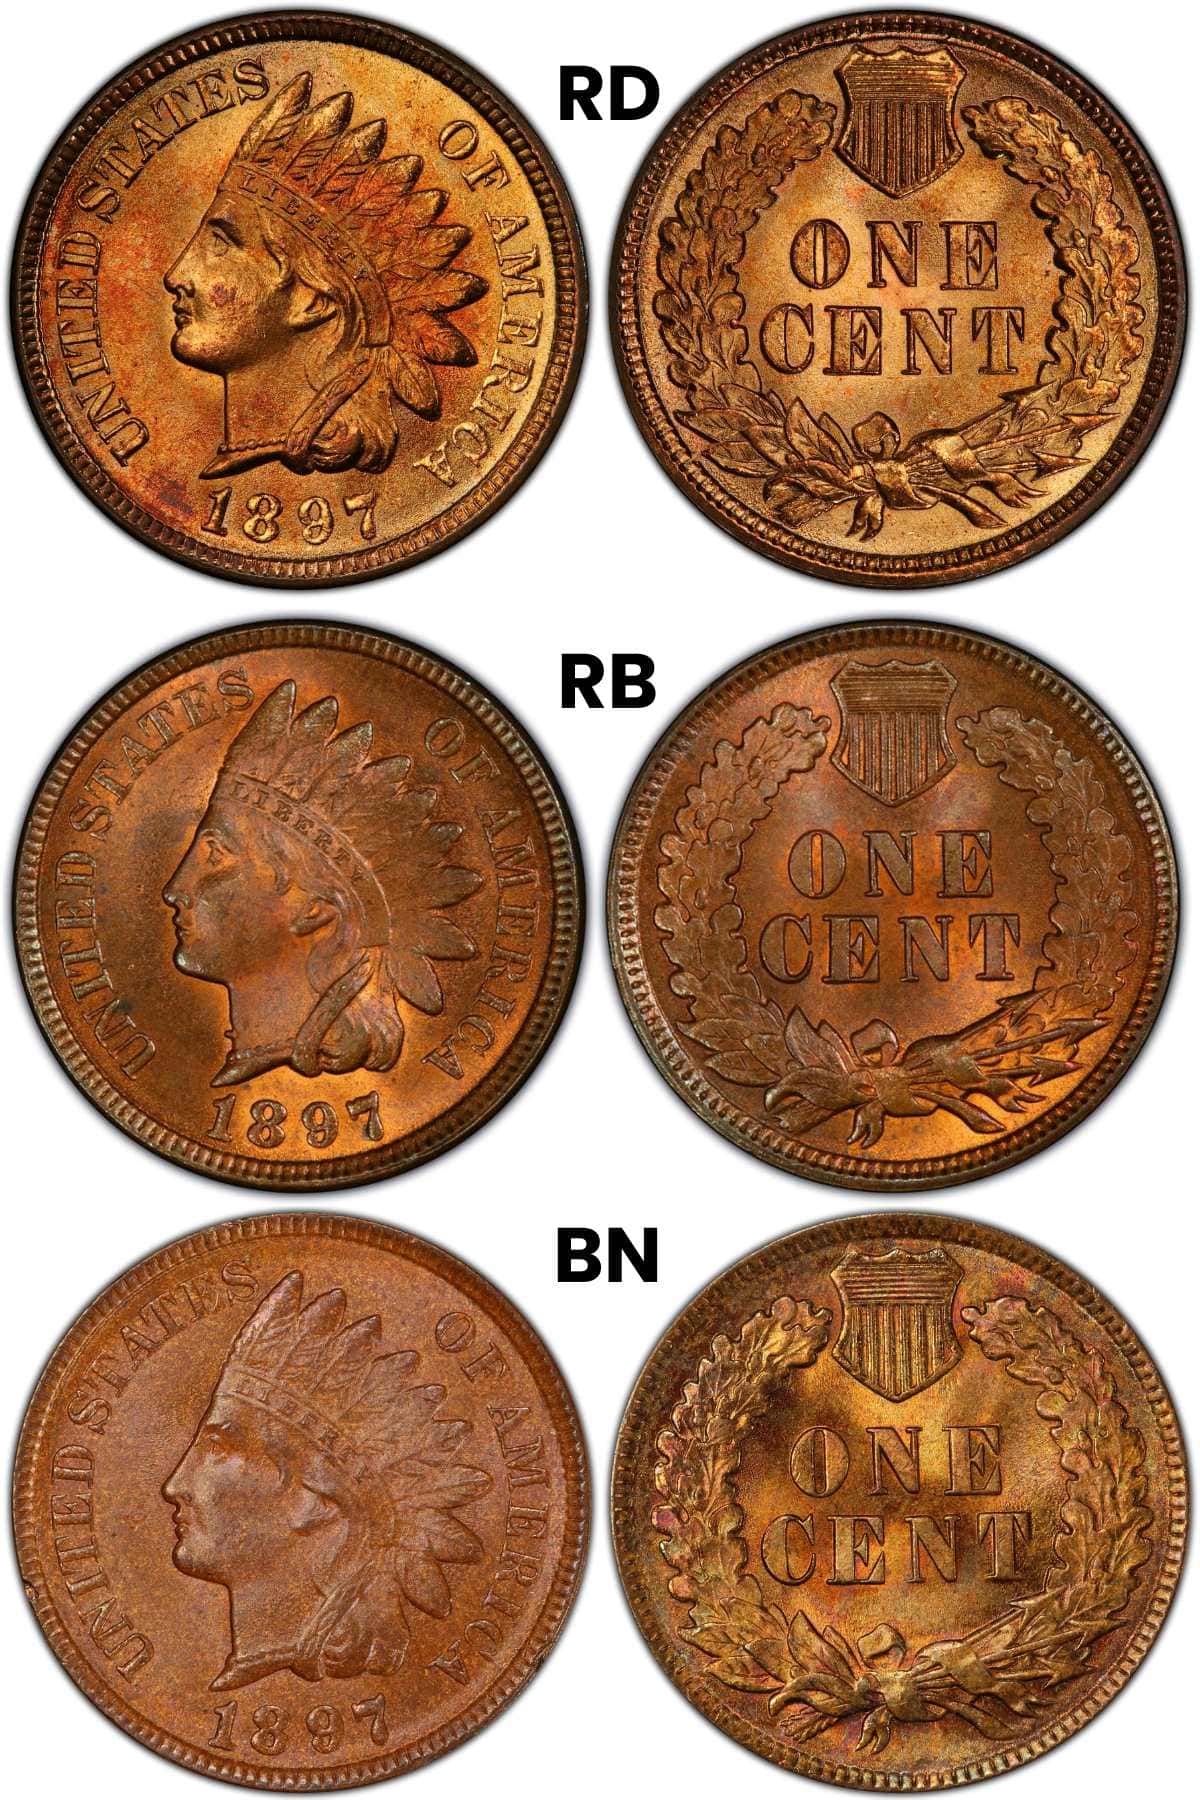 1897 Indian Head Penny color